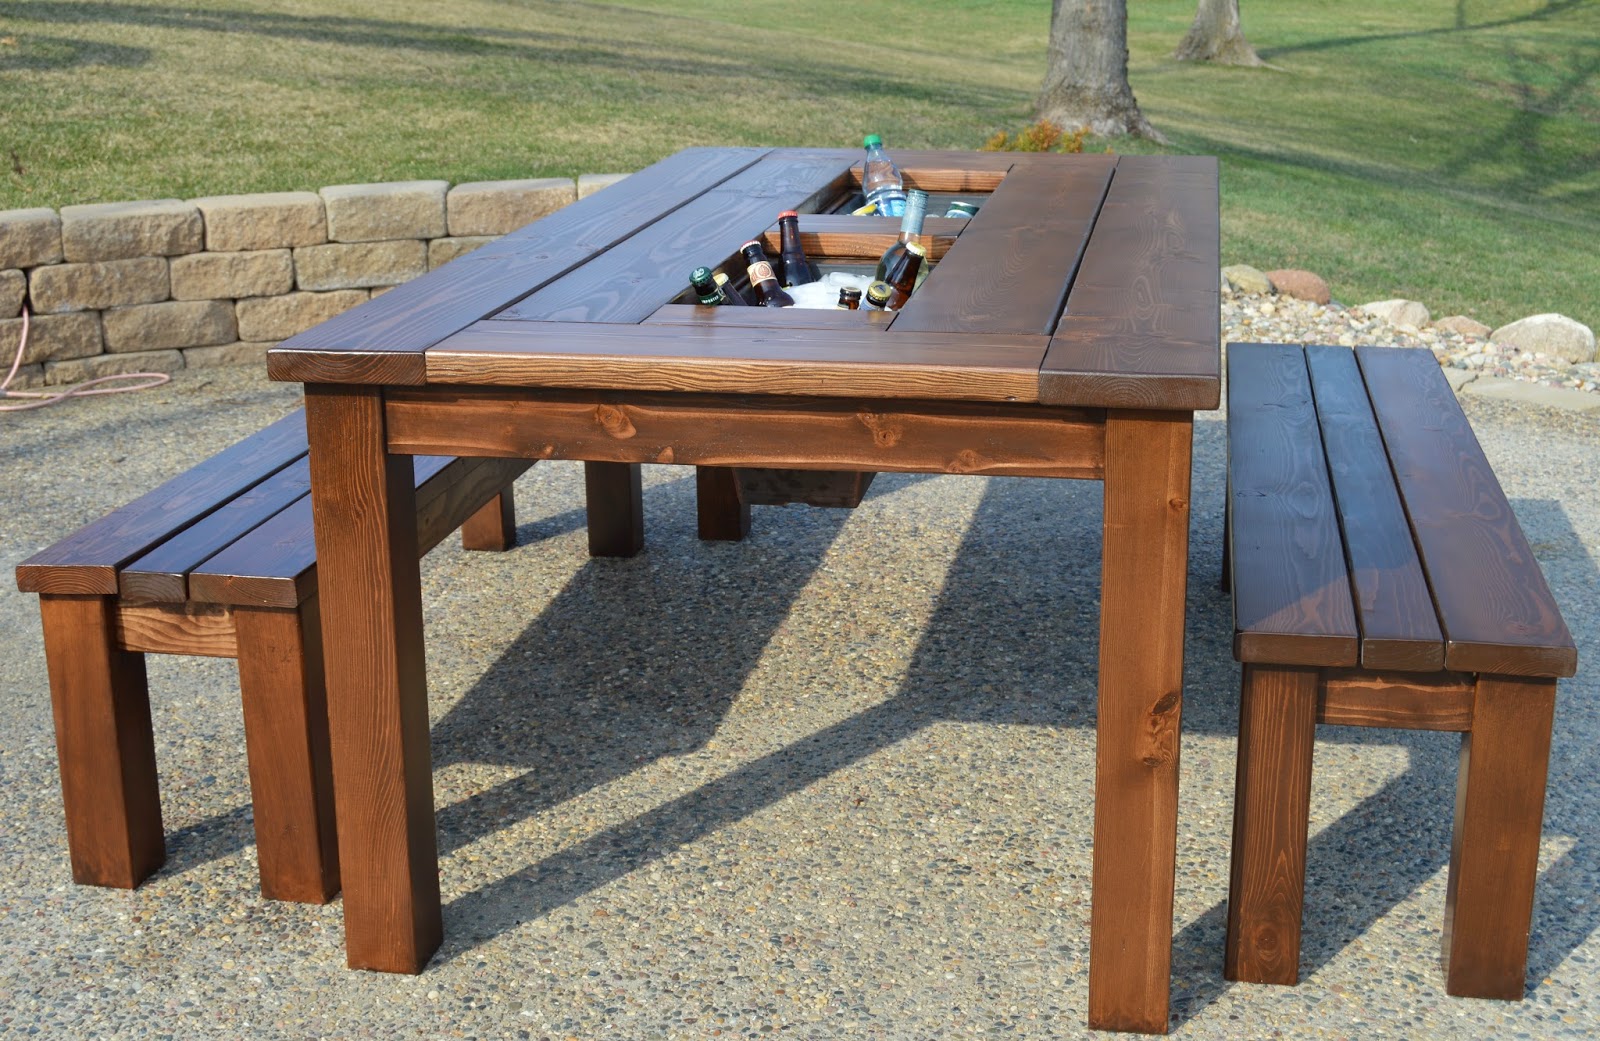 KRUSE'S WORKSHOP: Patio Party Table with Built In Beer 